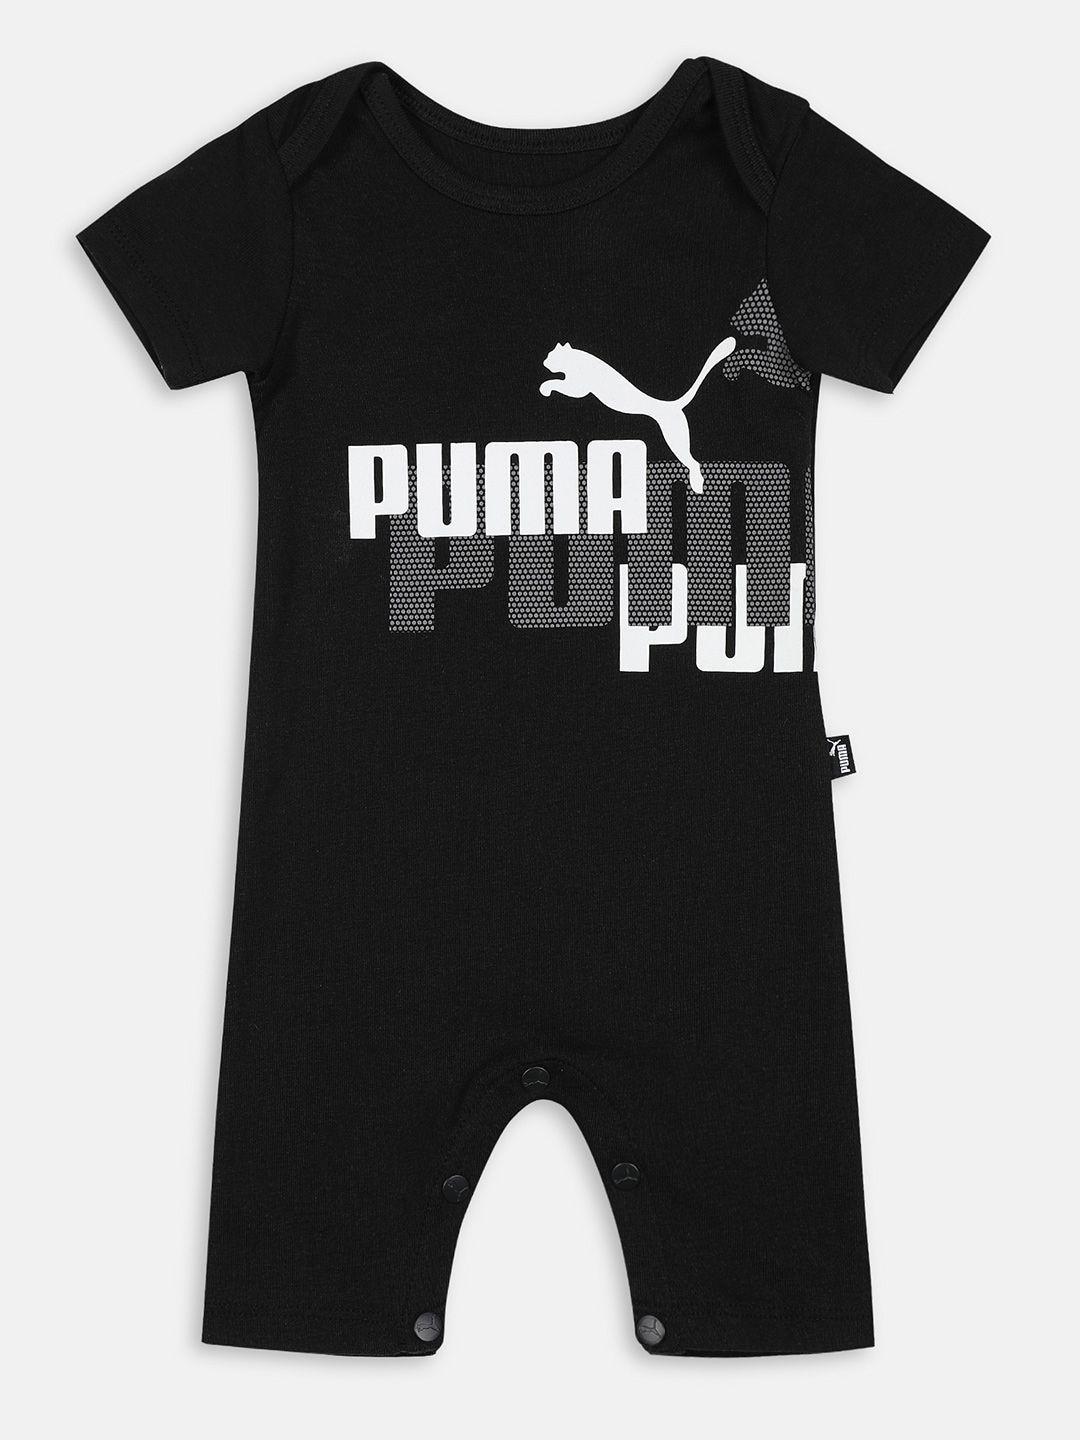 puma-infant-kids-brand-logo-printed-pure-cotton-minicats-oncie-overall-rompers